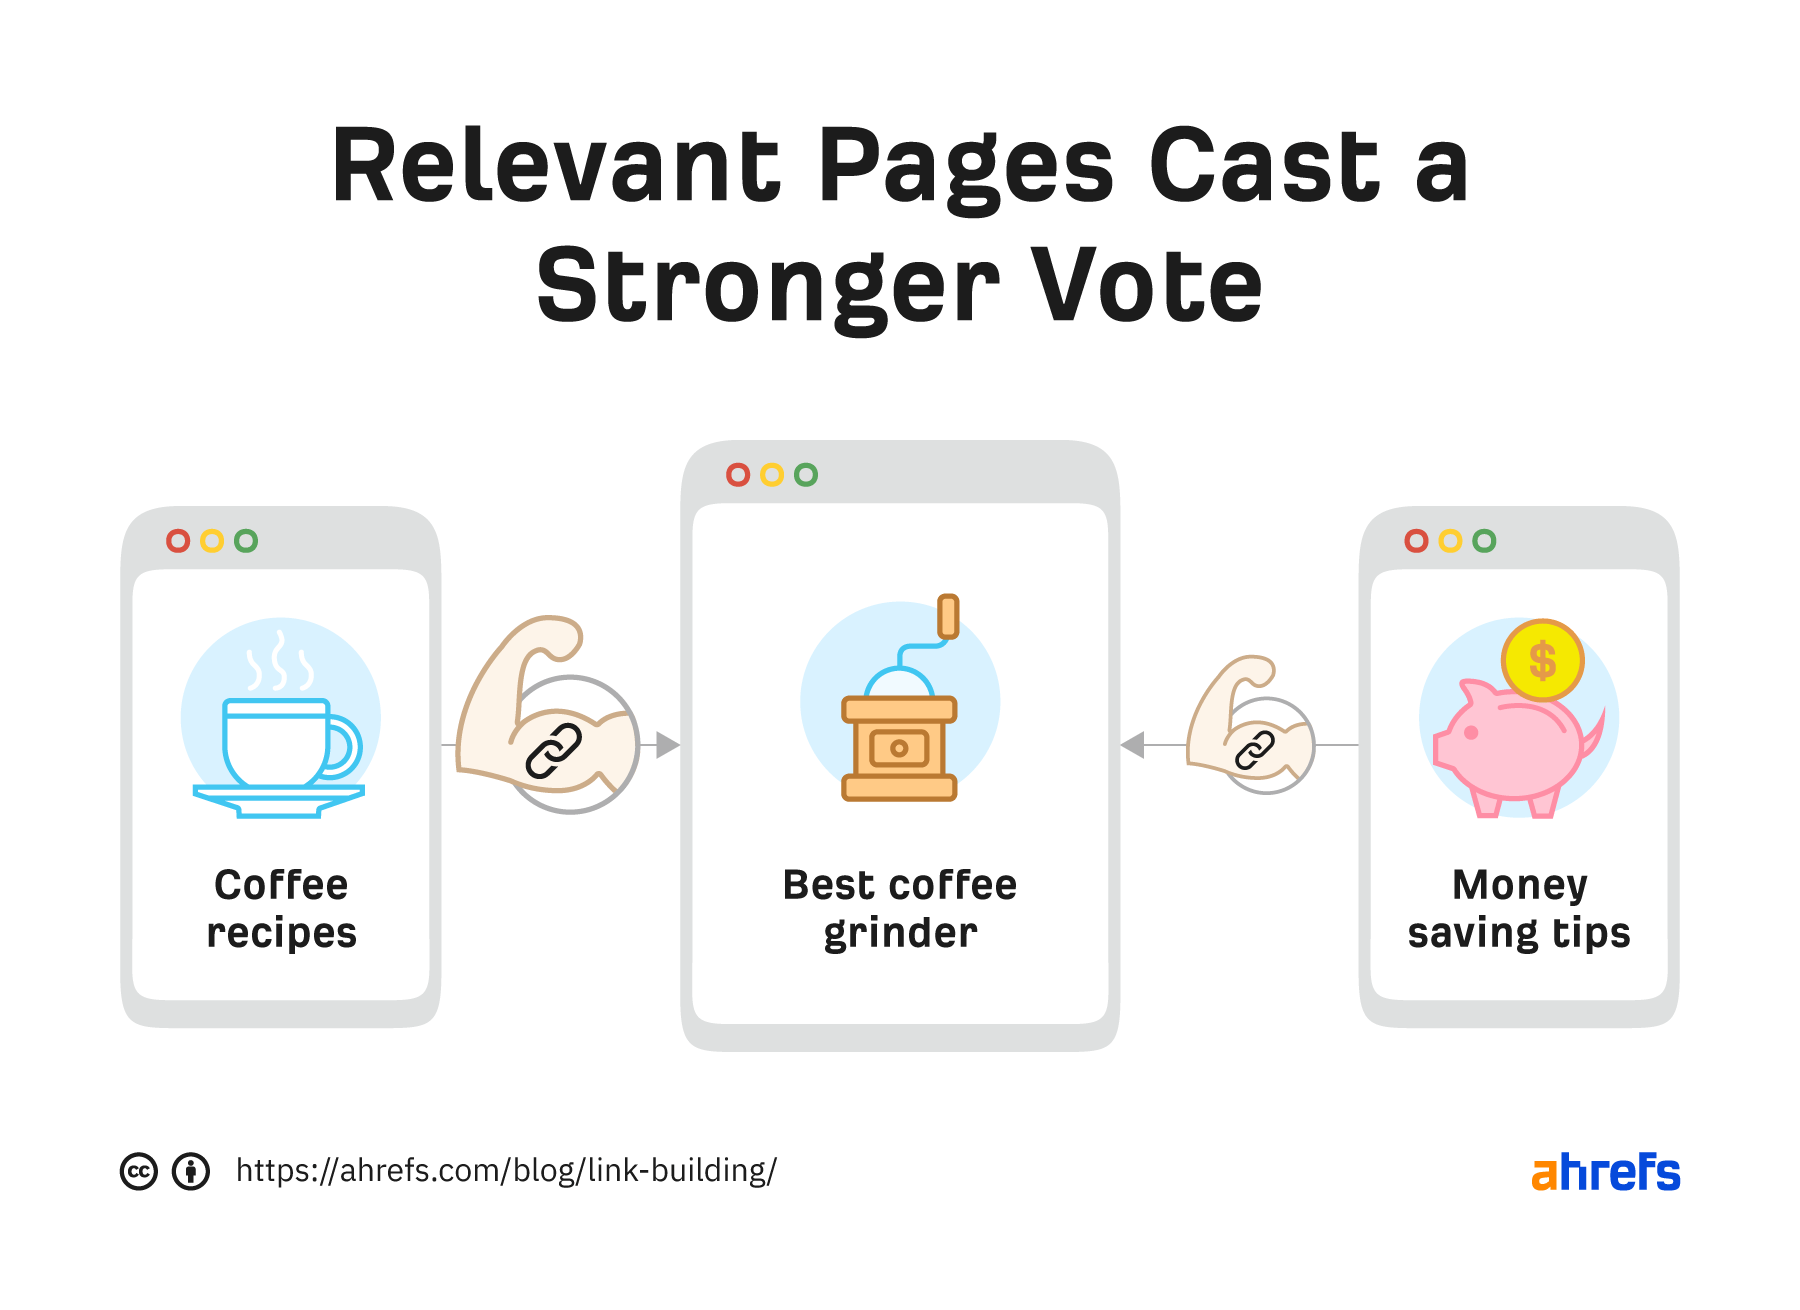 Illustration of how relevant pages cast stronger votes on a page